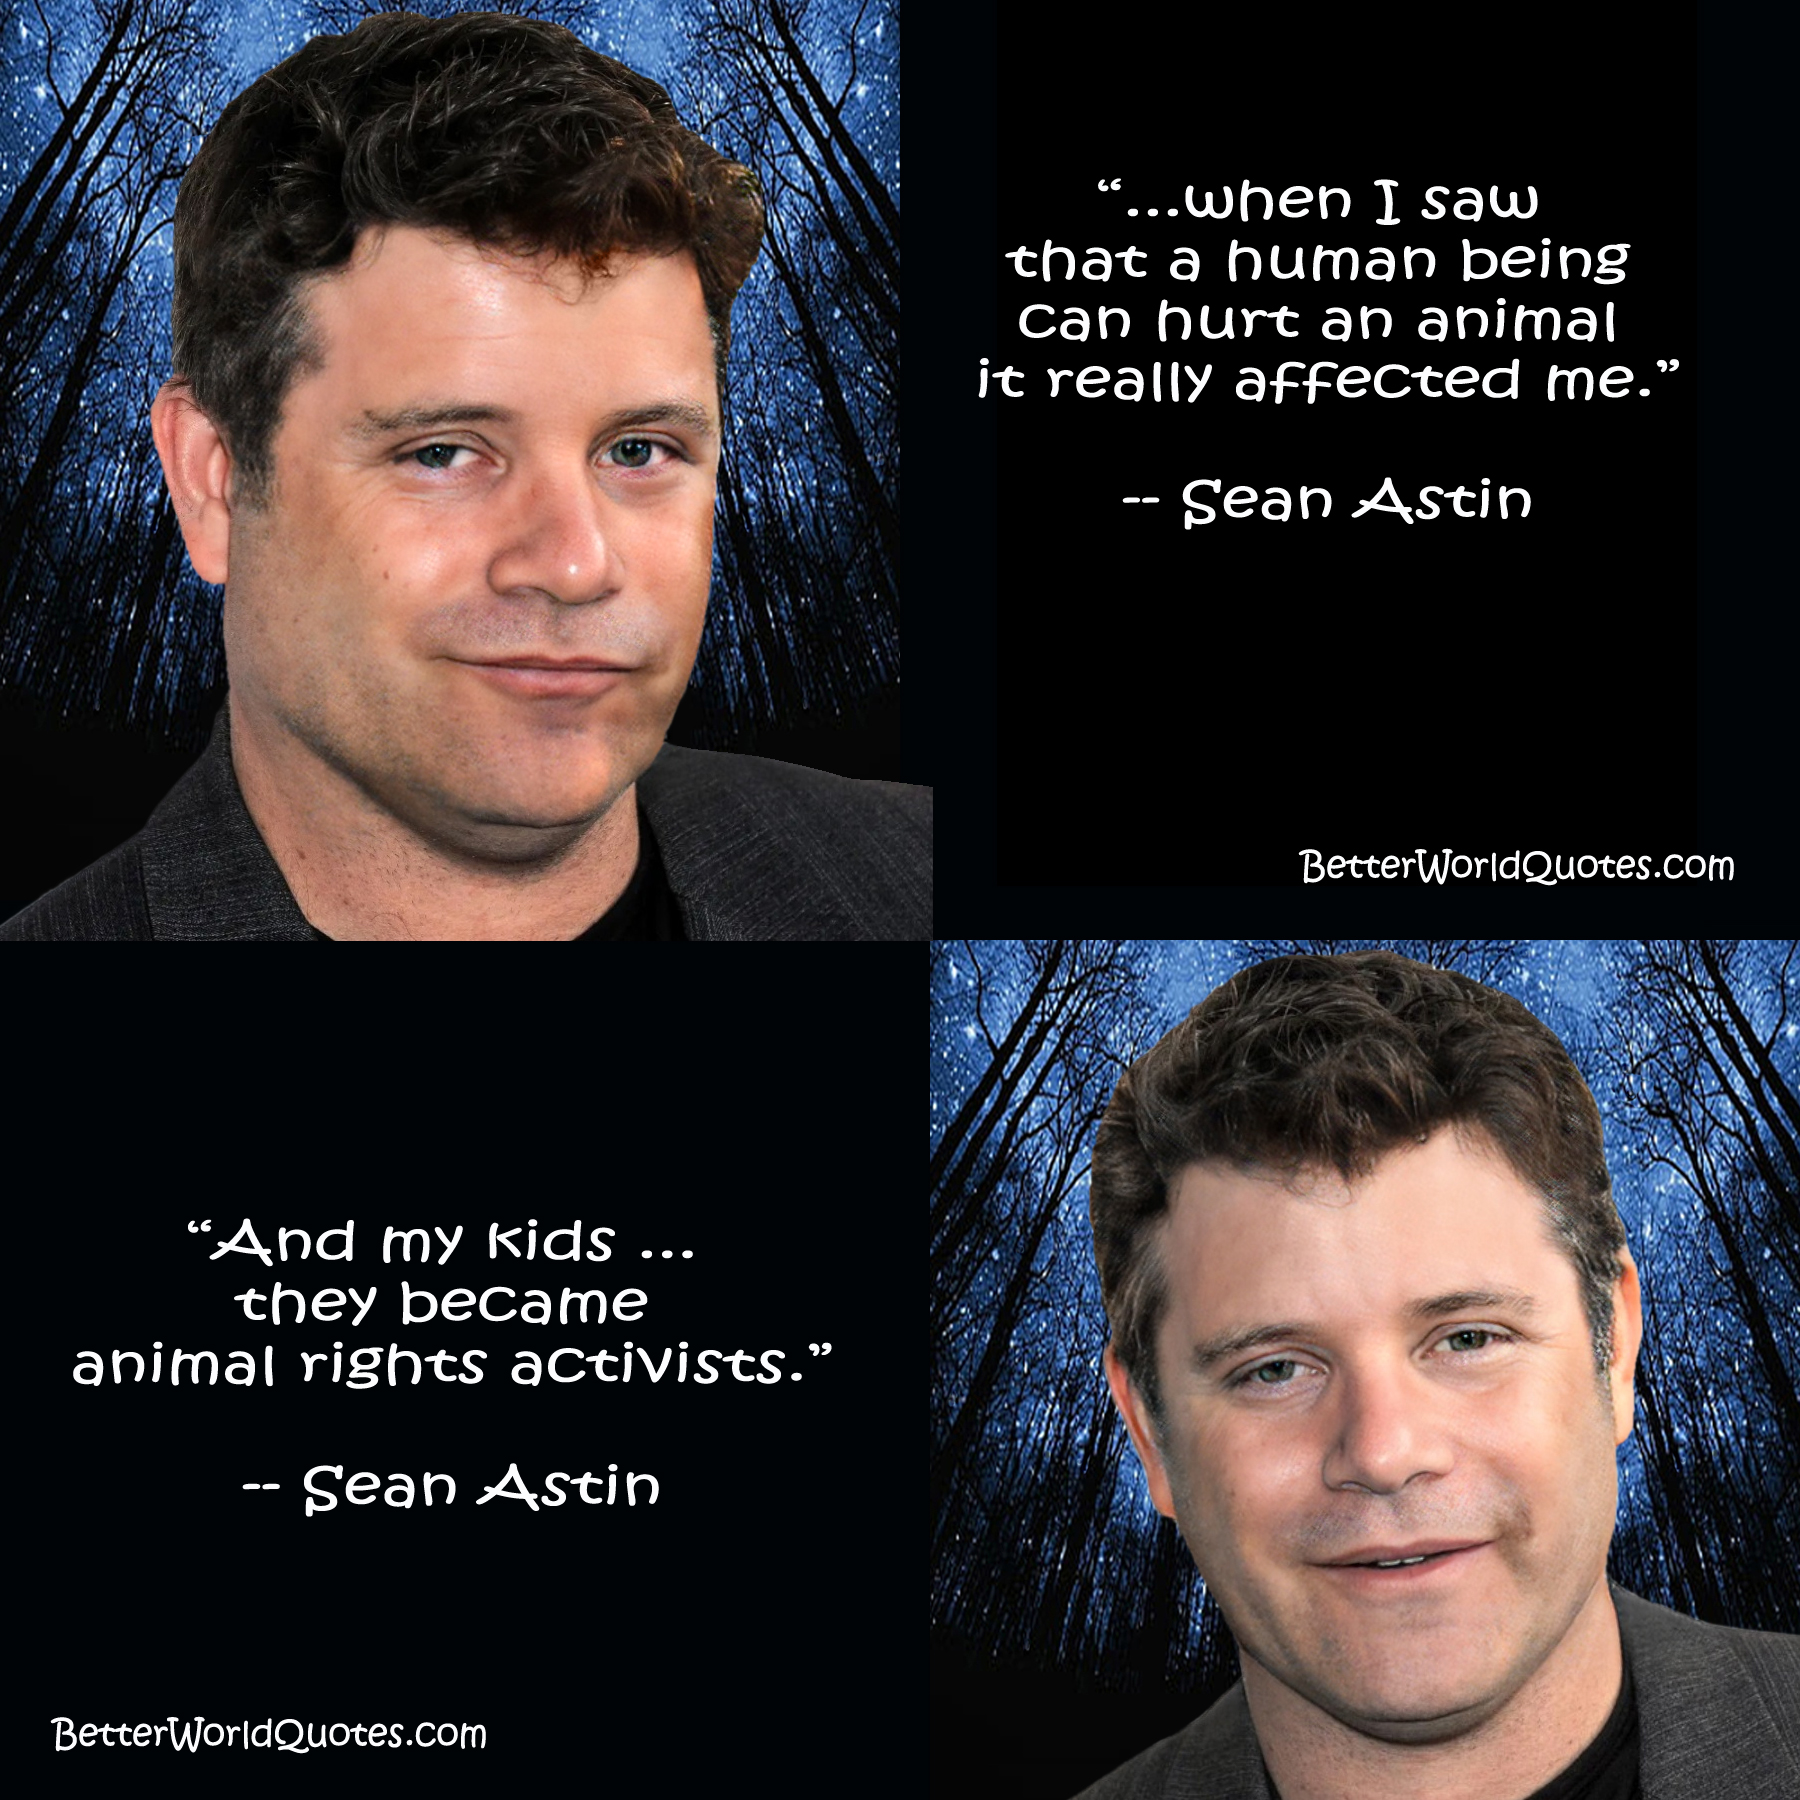 Sean Astini: ...when 
                    I saw that a human being can hurt an animal it really affected 
                    me. And my kids ... they became animal rights activists.